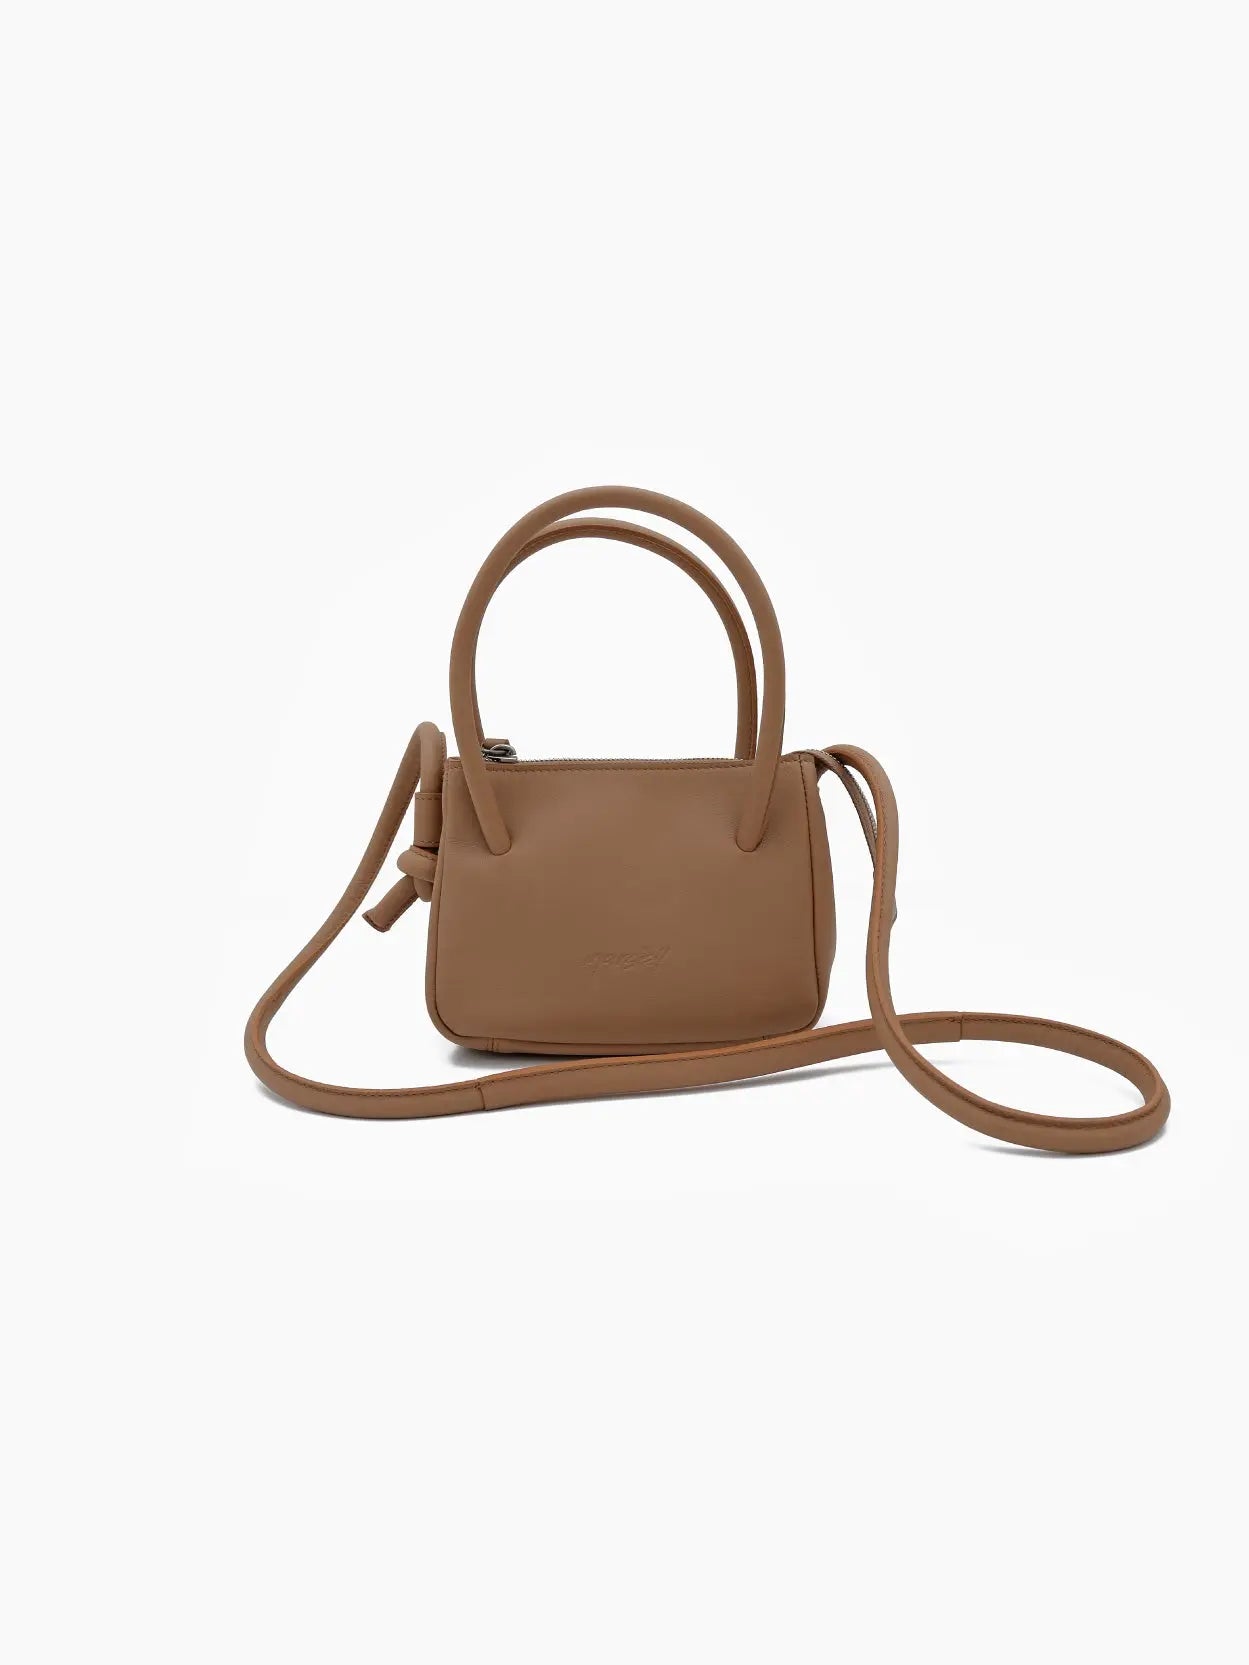 A small brown crossbody Sacco Piccolo Mini Bag Hazelnut with a minimalist design, featuring rounded handles, a long adjustable strap, and a subtle embossed logo on the front. The bag by Marsèll, available at Bassalstore Barcelona, is set against a plain white background.